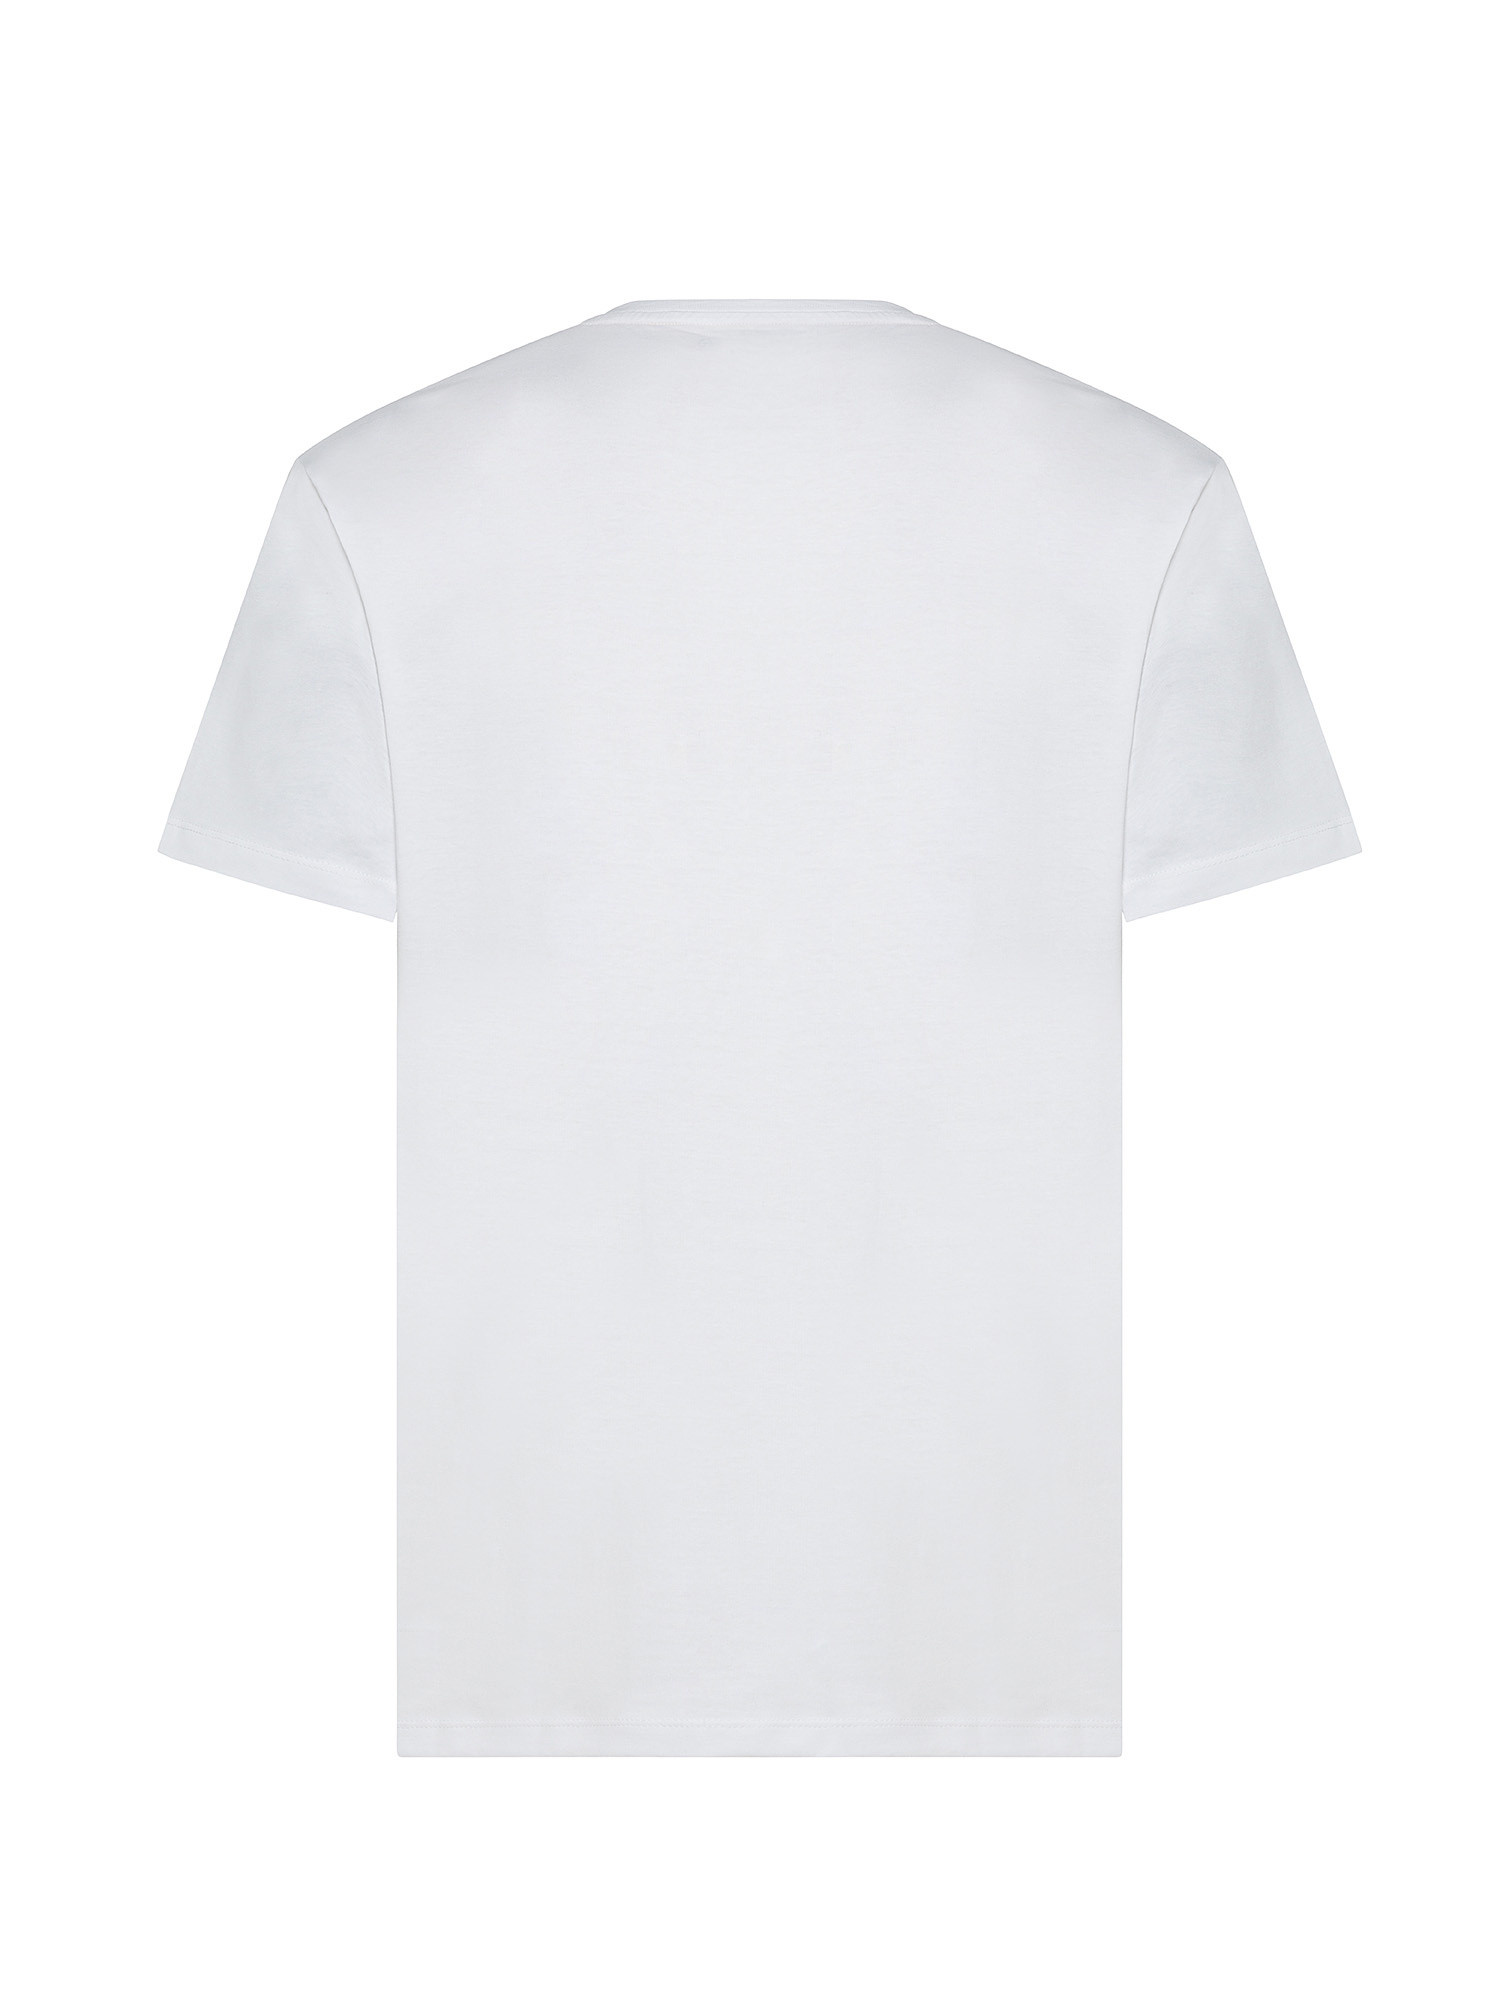 Pepe Jeans - T-shirt con stampa e logo in cotone, Bianco, large image number 1